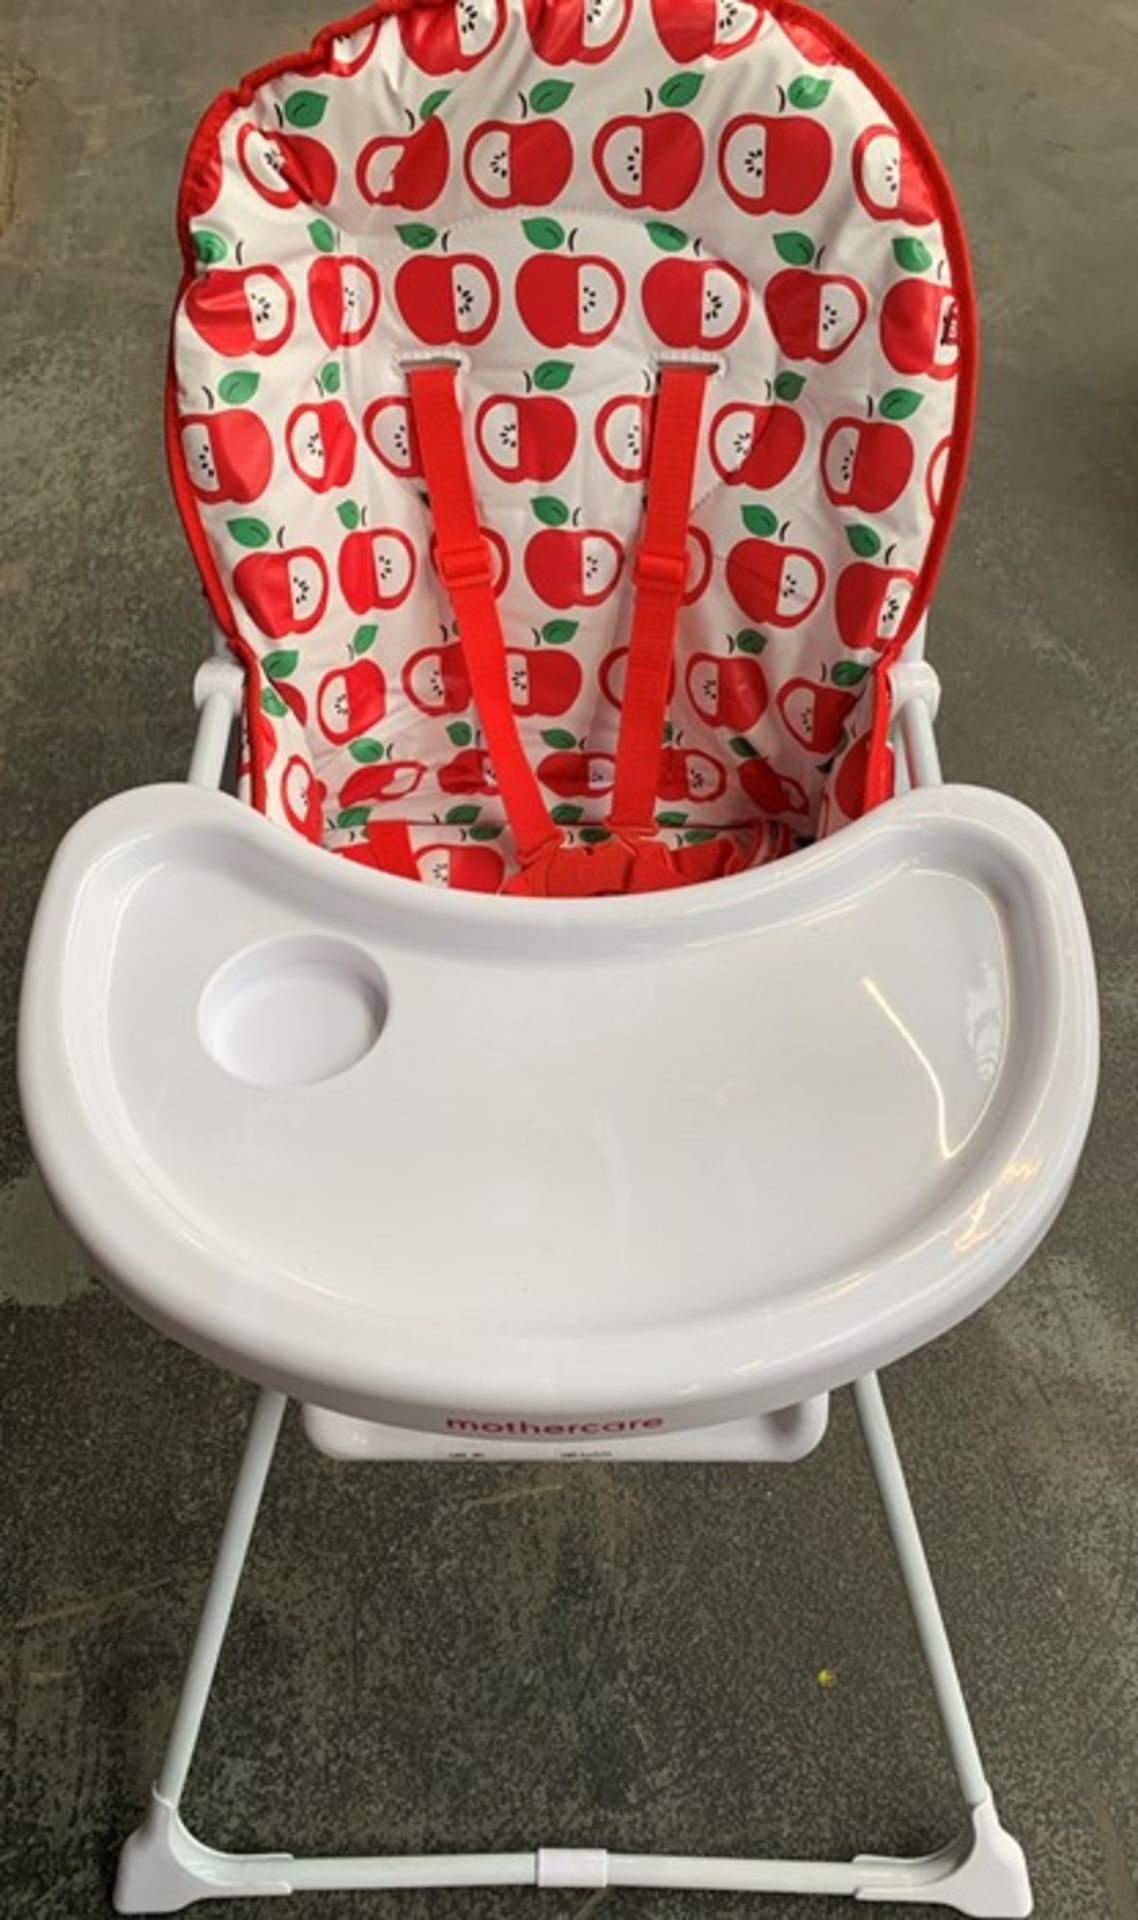 1 HIGH CHAIR WITH RED APPLE DESIGN / RRP £80.00 (PUBLIC VIEWING AVAILABLE)